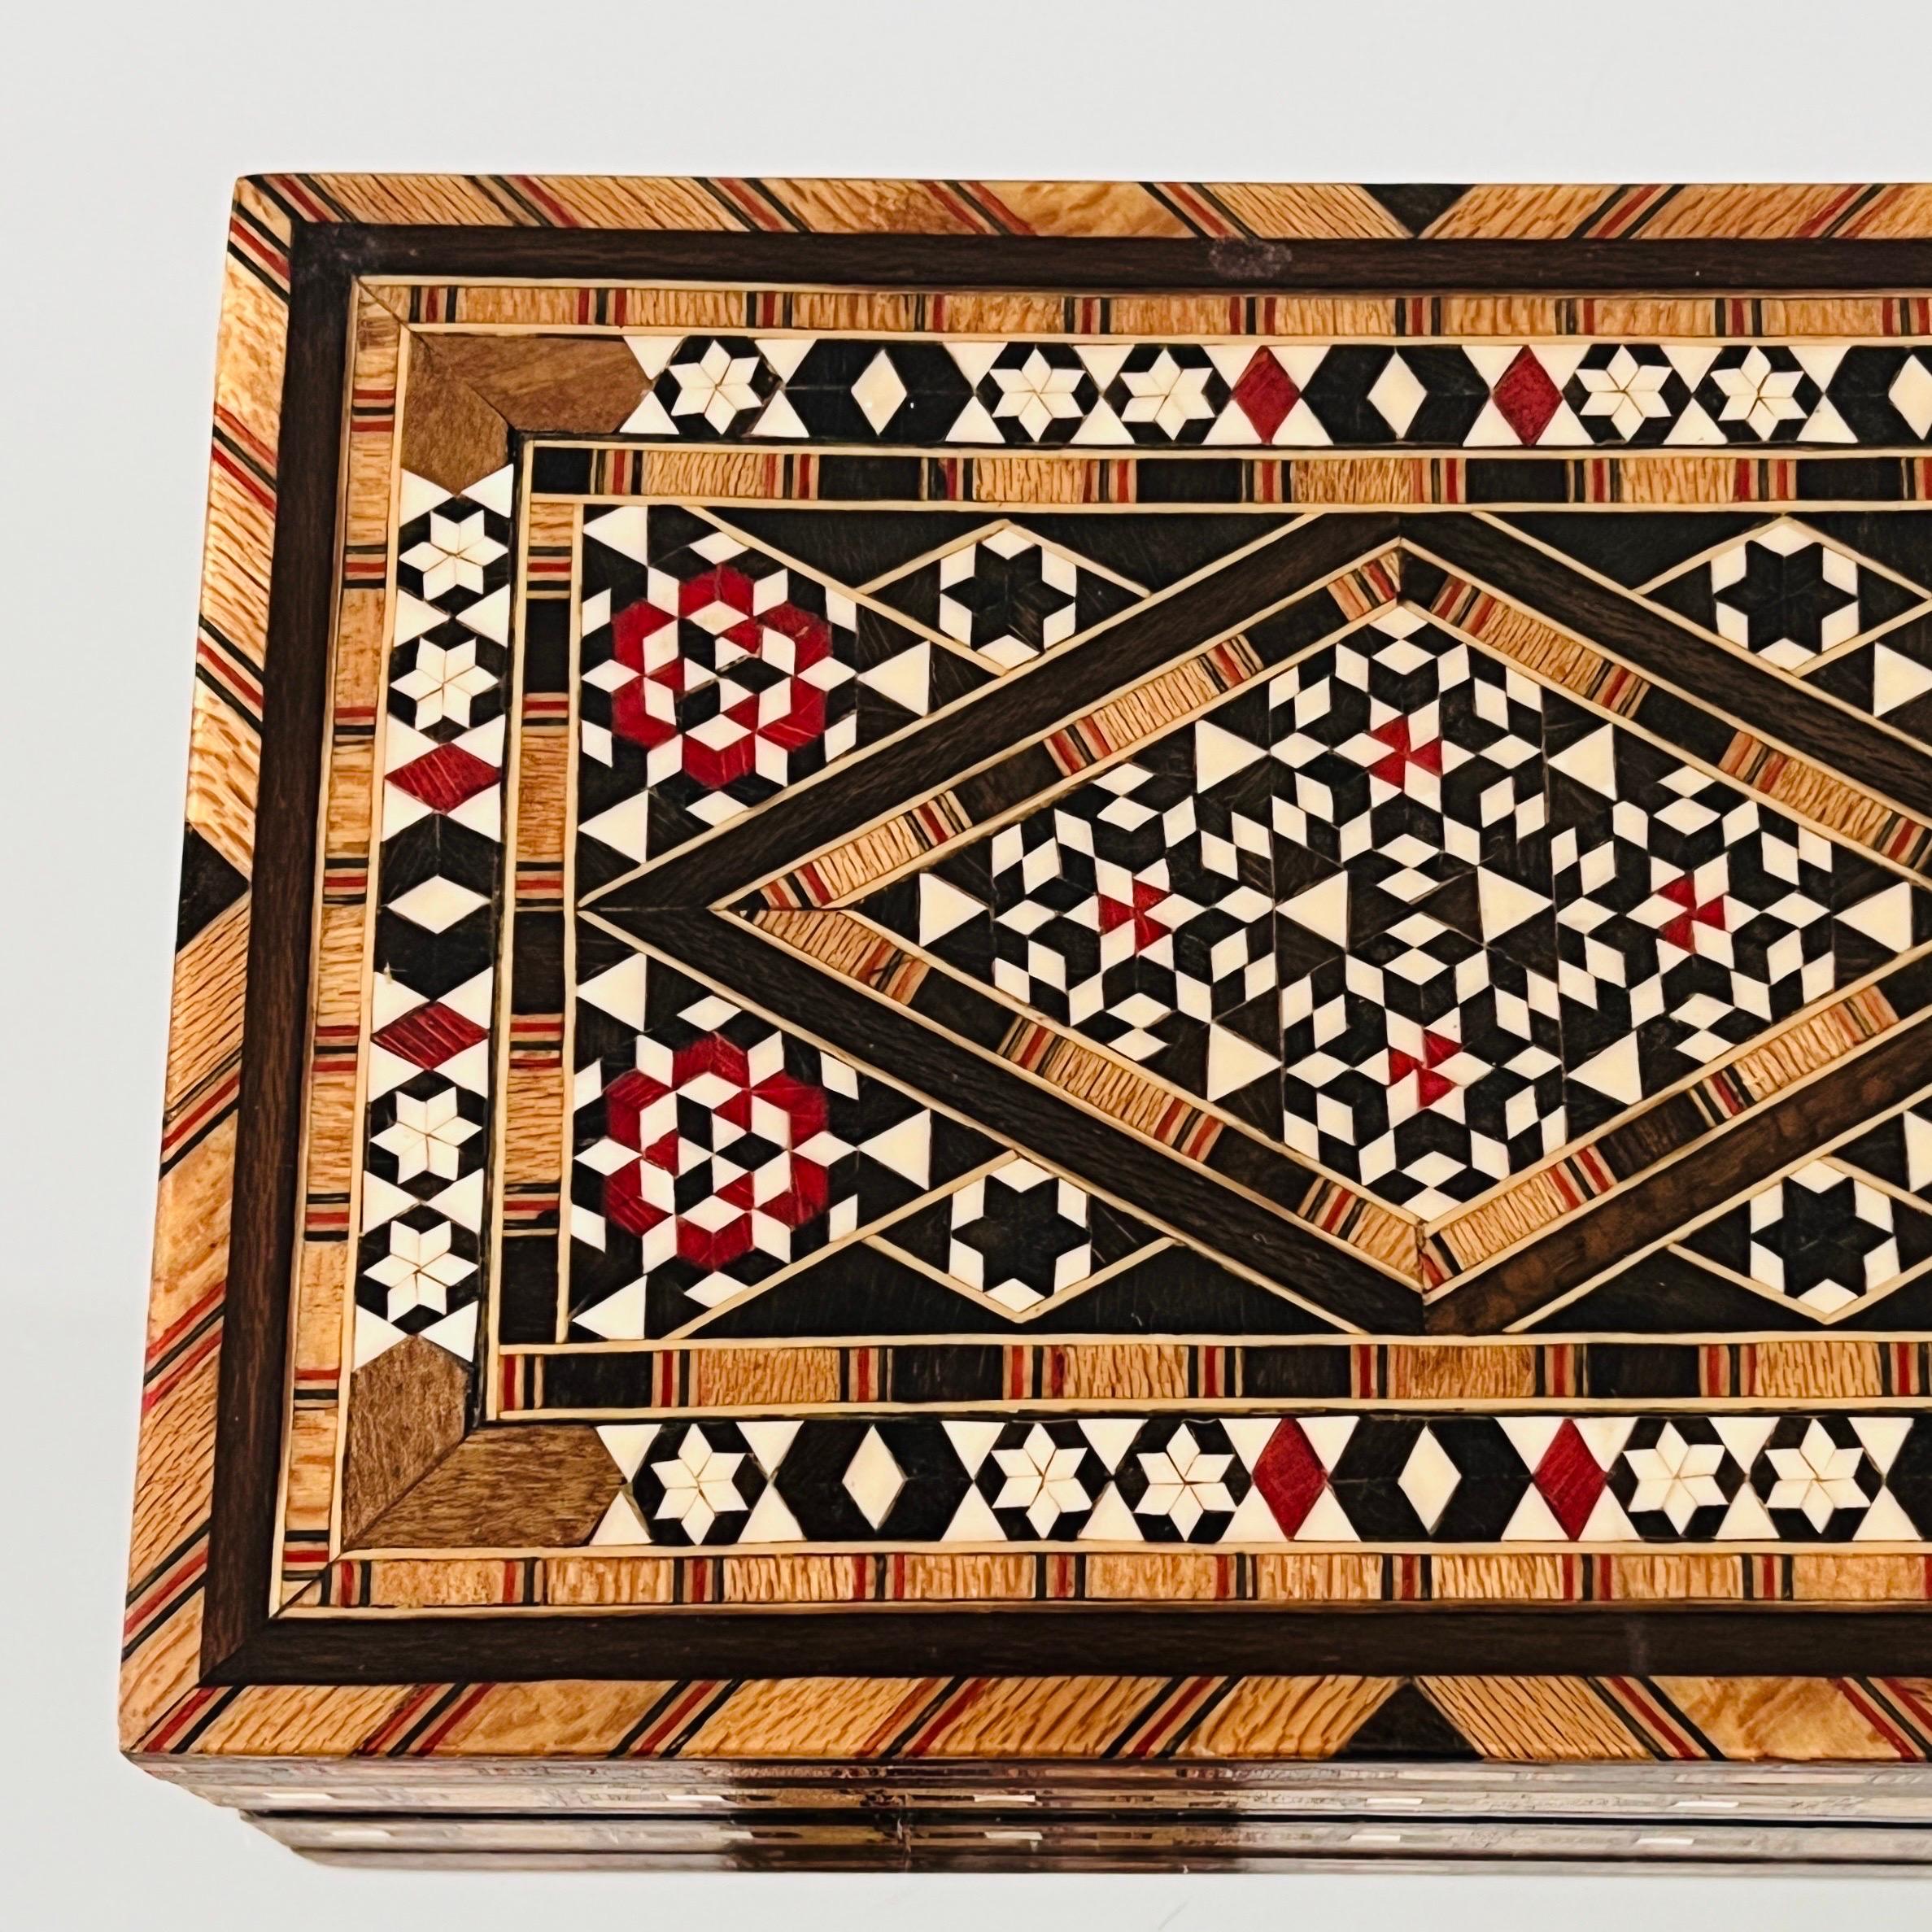 West Asian Marquetry Wood Box with Mosaic Bone Inlays, Middle East. c. 1970's For Sale